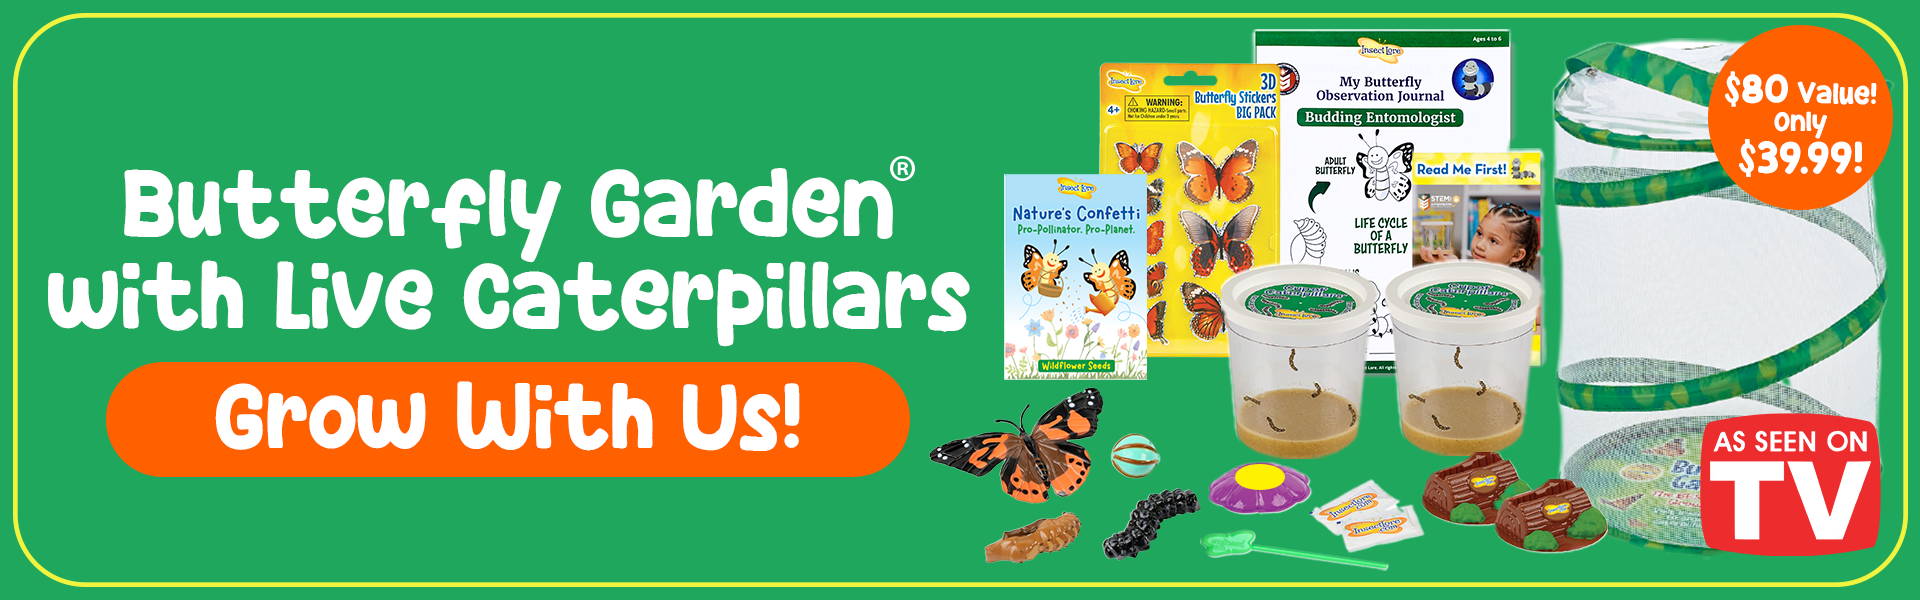 Yellow Banner Showcasing Insect Lore's September Deal of the Month. Mini Butterfly Garden Mesh Habitat, Two Cups of baby Caterpillars, Butterfly Life Cycle Stages Figurines, Butterfly Wind-Up Toy, Sugar Packets, Nectar Dropper, Chrysalis Holding Logs.